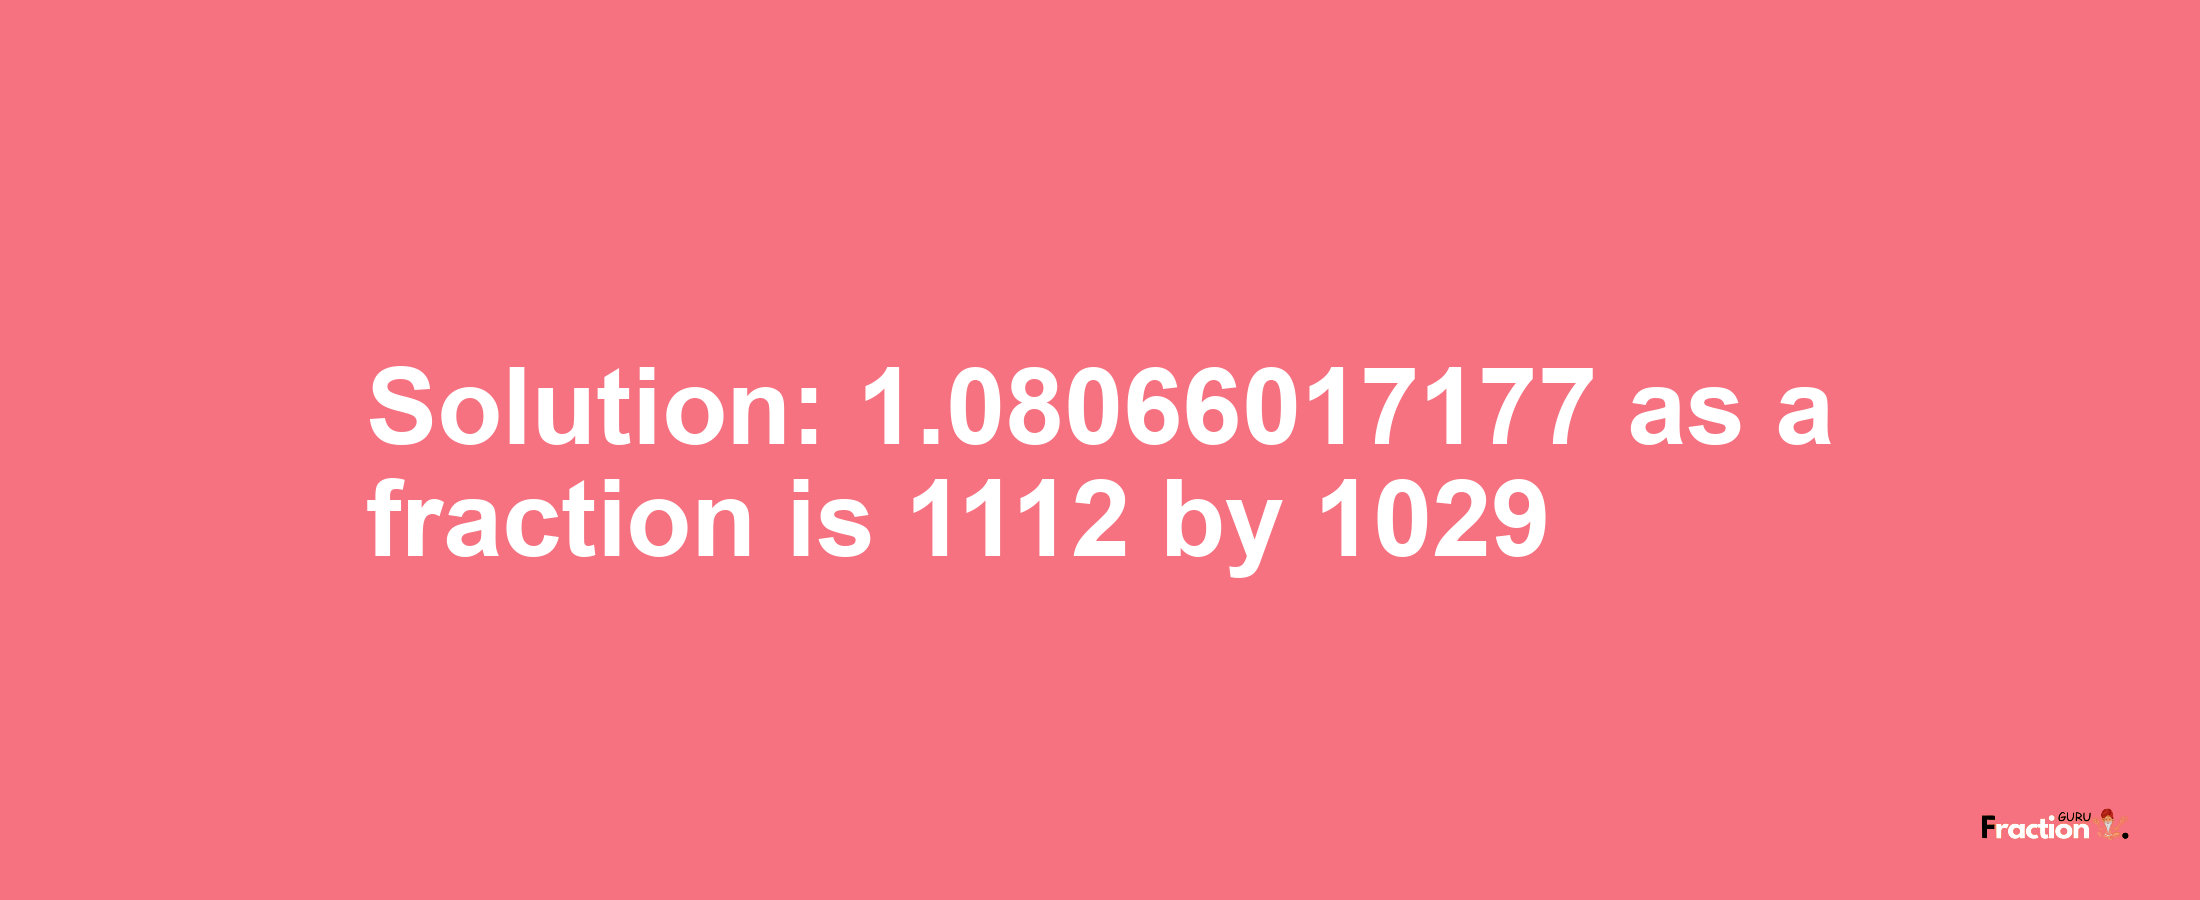 Solution:1.08066017177 as a fraction is 1112/1029